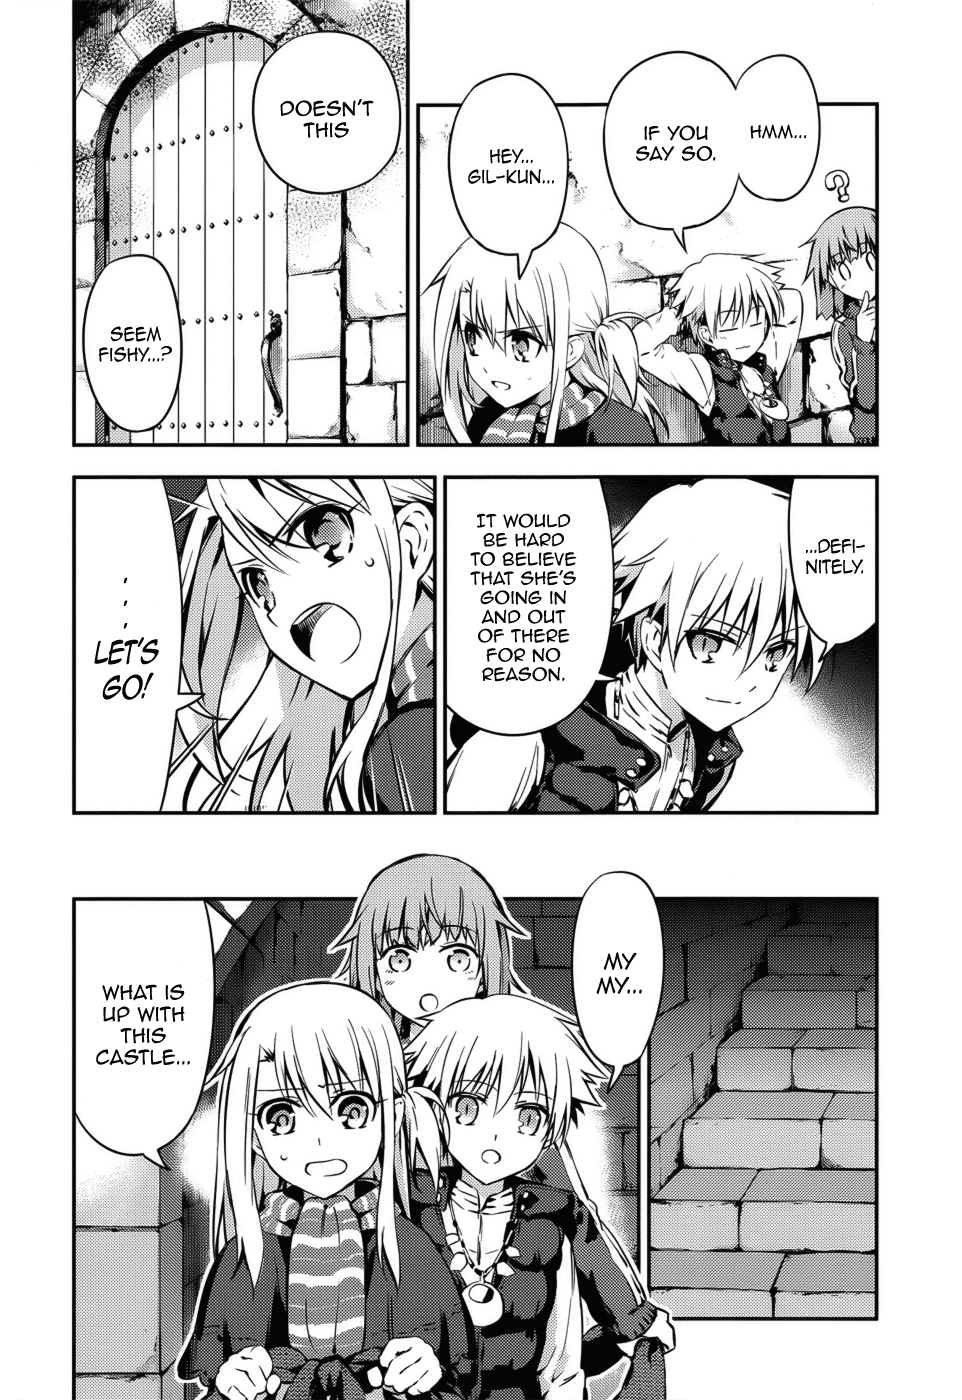 Fate/kaleid liner PRISMA☆ILLYA 3rei!! Vol. 1 Ch. 3 To the True Entrance